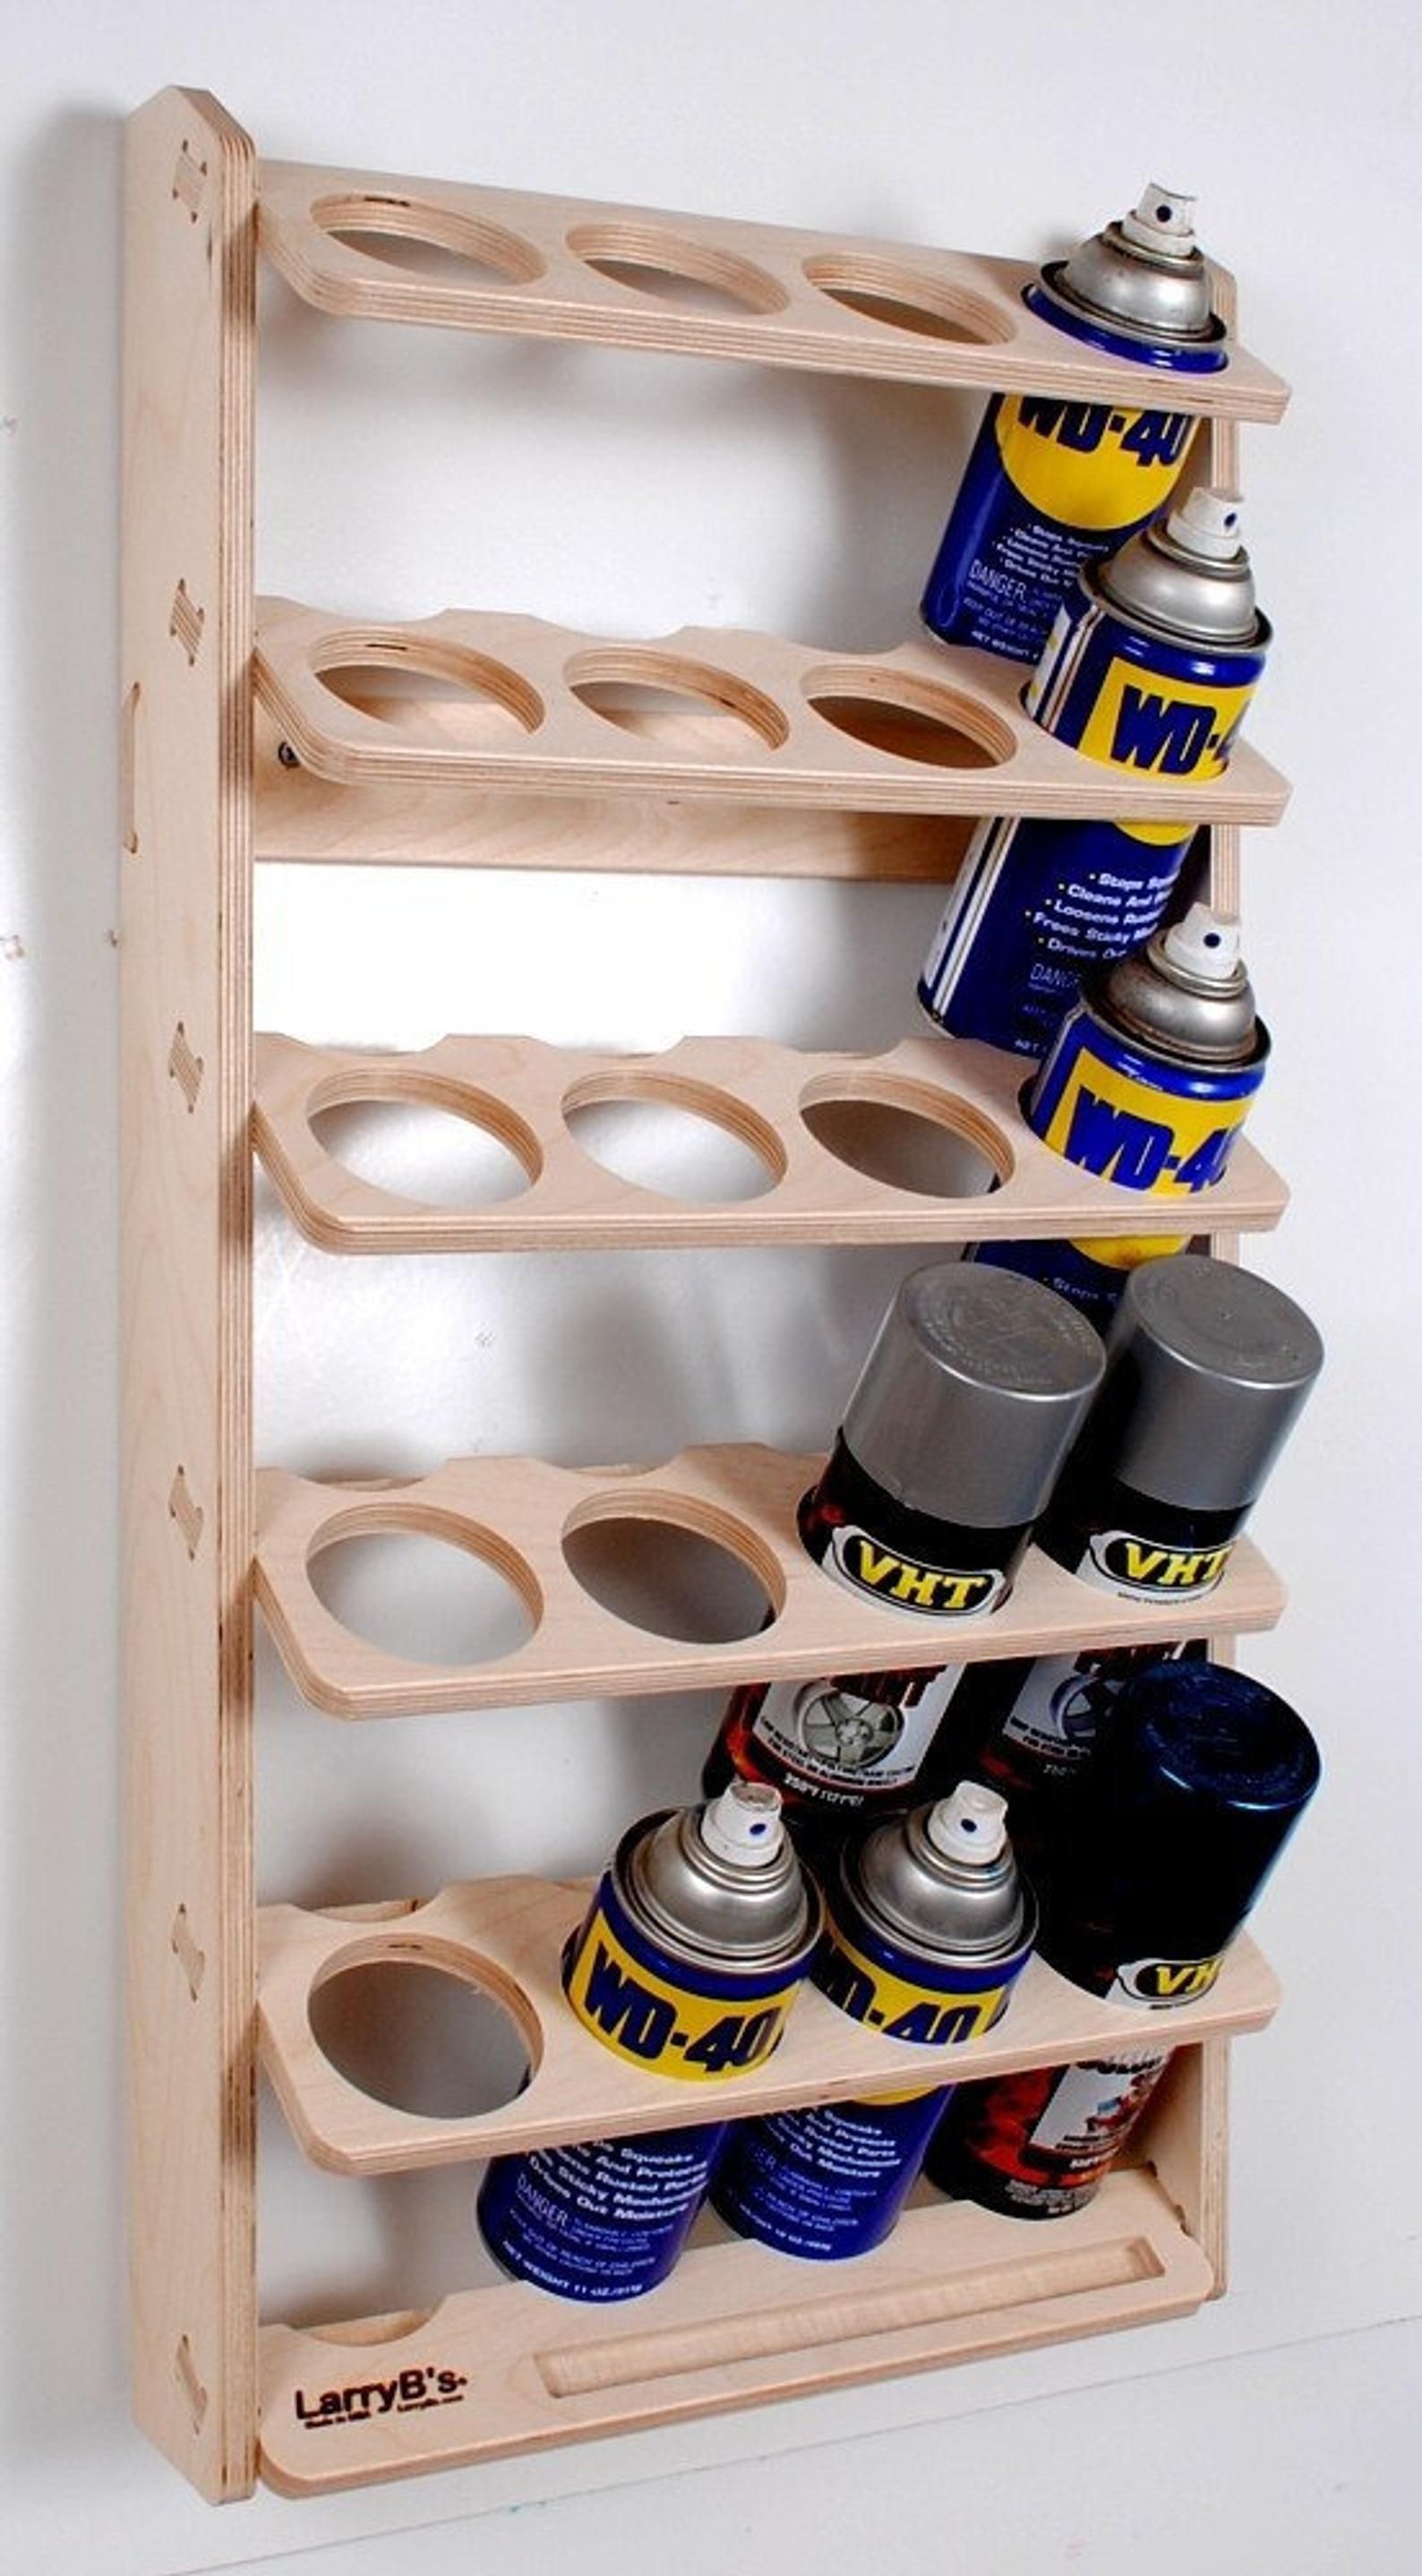 20 Can Spray Paint or Lube Can Wall Mount Storage Holder Rack - 20 Can Spray Paint or Lube Can Wall Mount Storage Holder Rack -   15 diy Storage organizers ideas